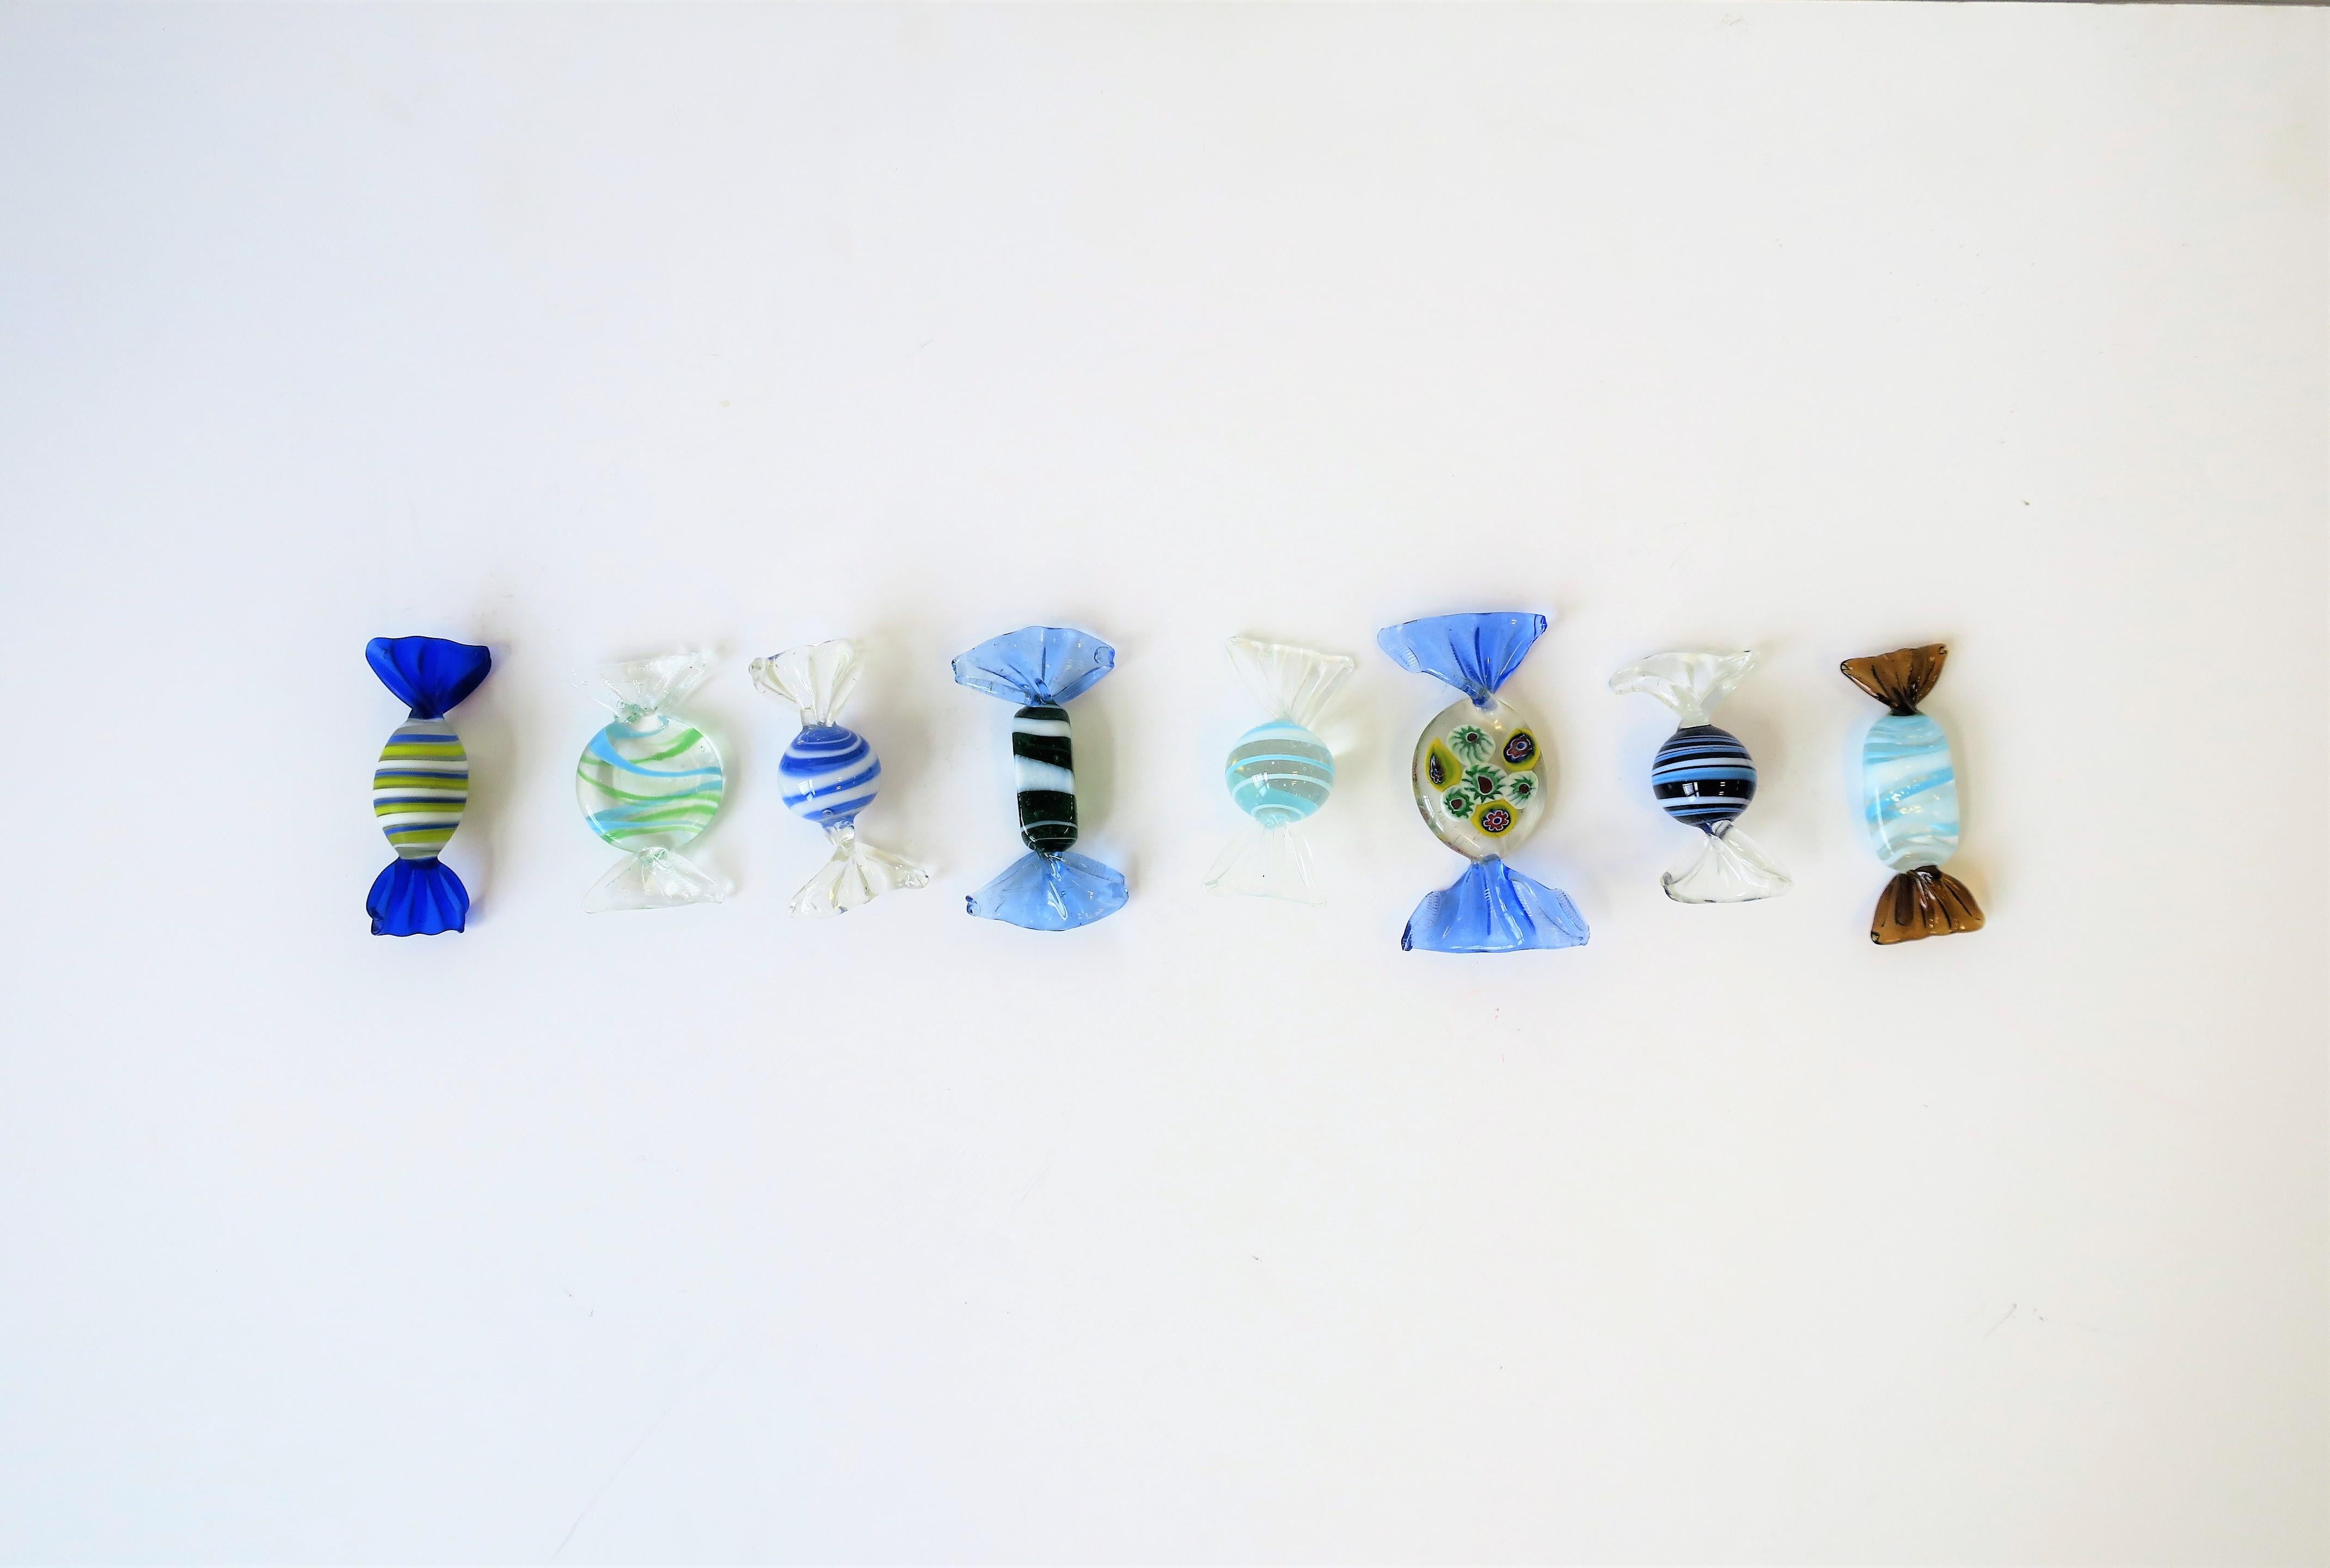 Eight (8) beautiful blue and white Italian Murano art glass candy, Italy. Pieces are handblown. Colors include: blue, white, clear and a touch of yellow. Candies are in various shapes, swirls, and stripes, including one with a millefiori design